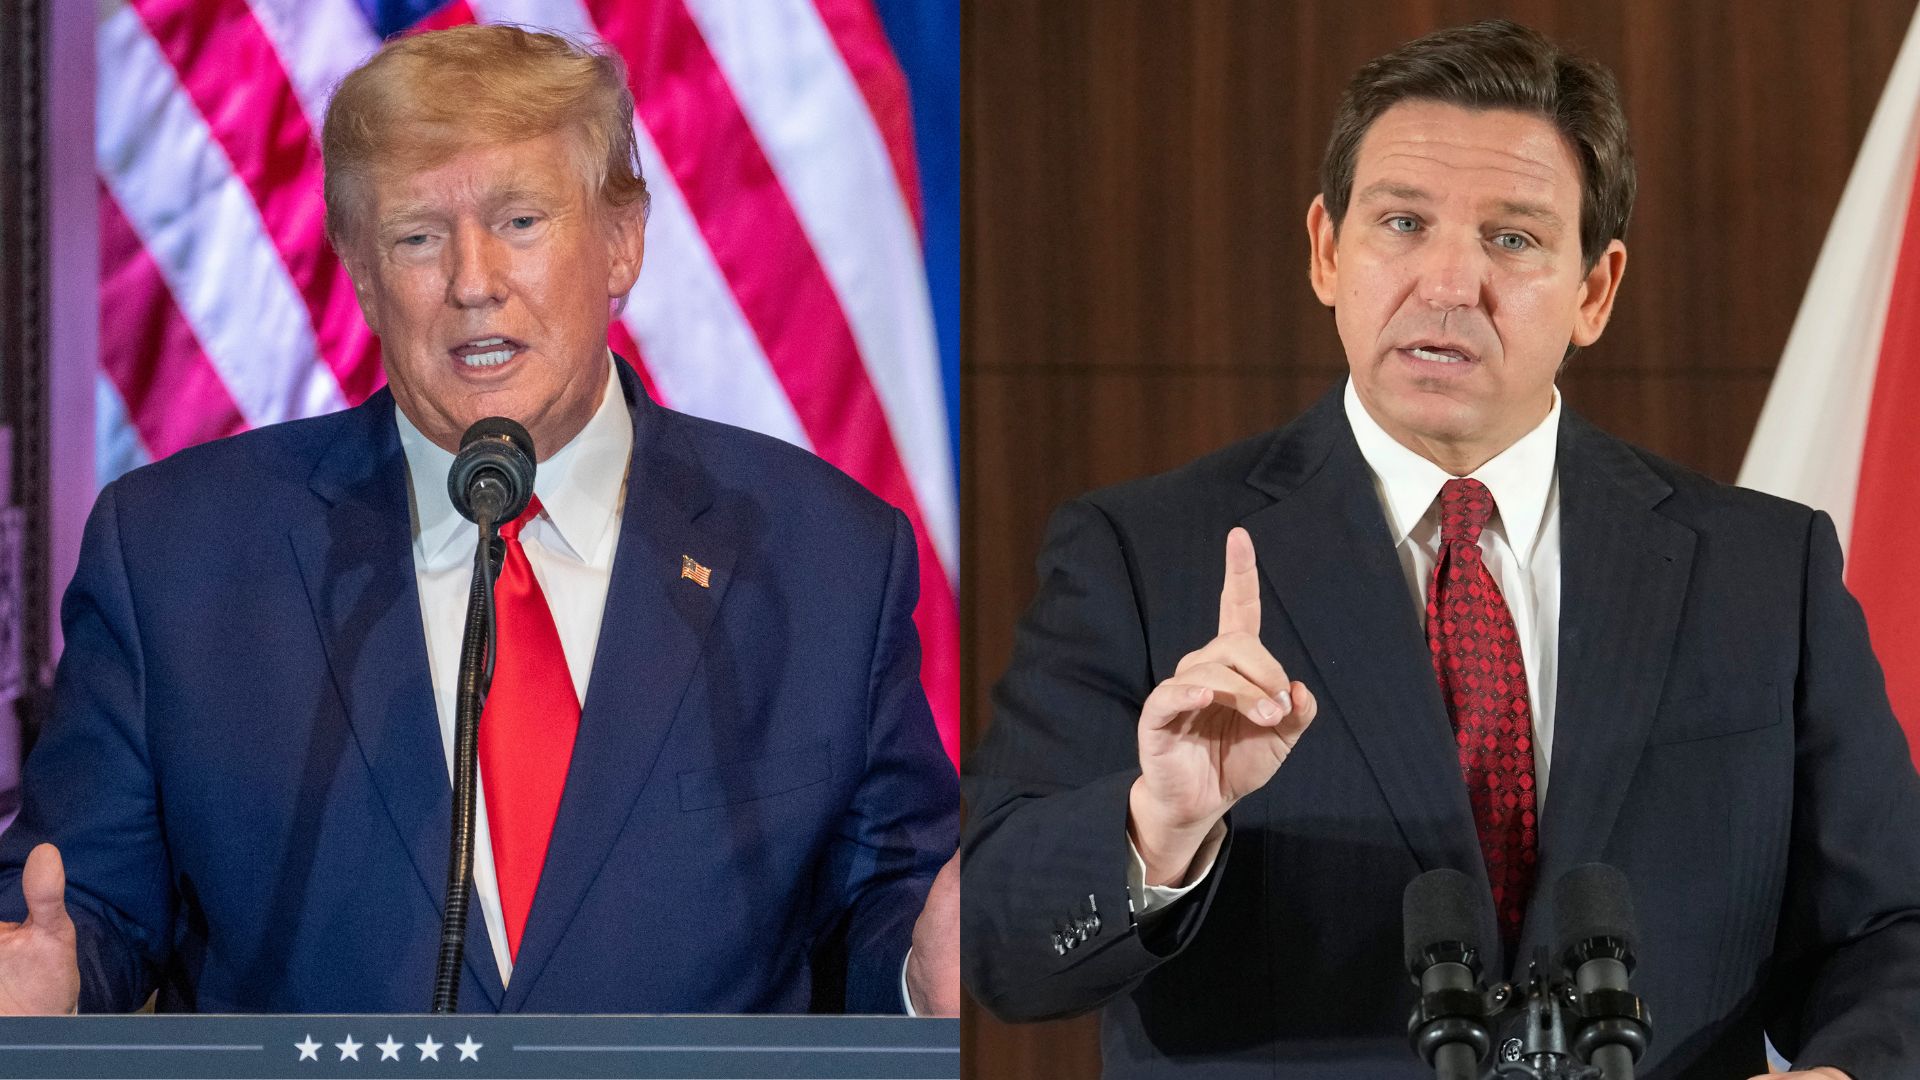 NEW POLL: Trump Fares 4 Points Worse Against Biden Than DeSantis, But Doubles His Primary Lead On Florida Gov. to Whopping 29 Points